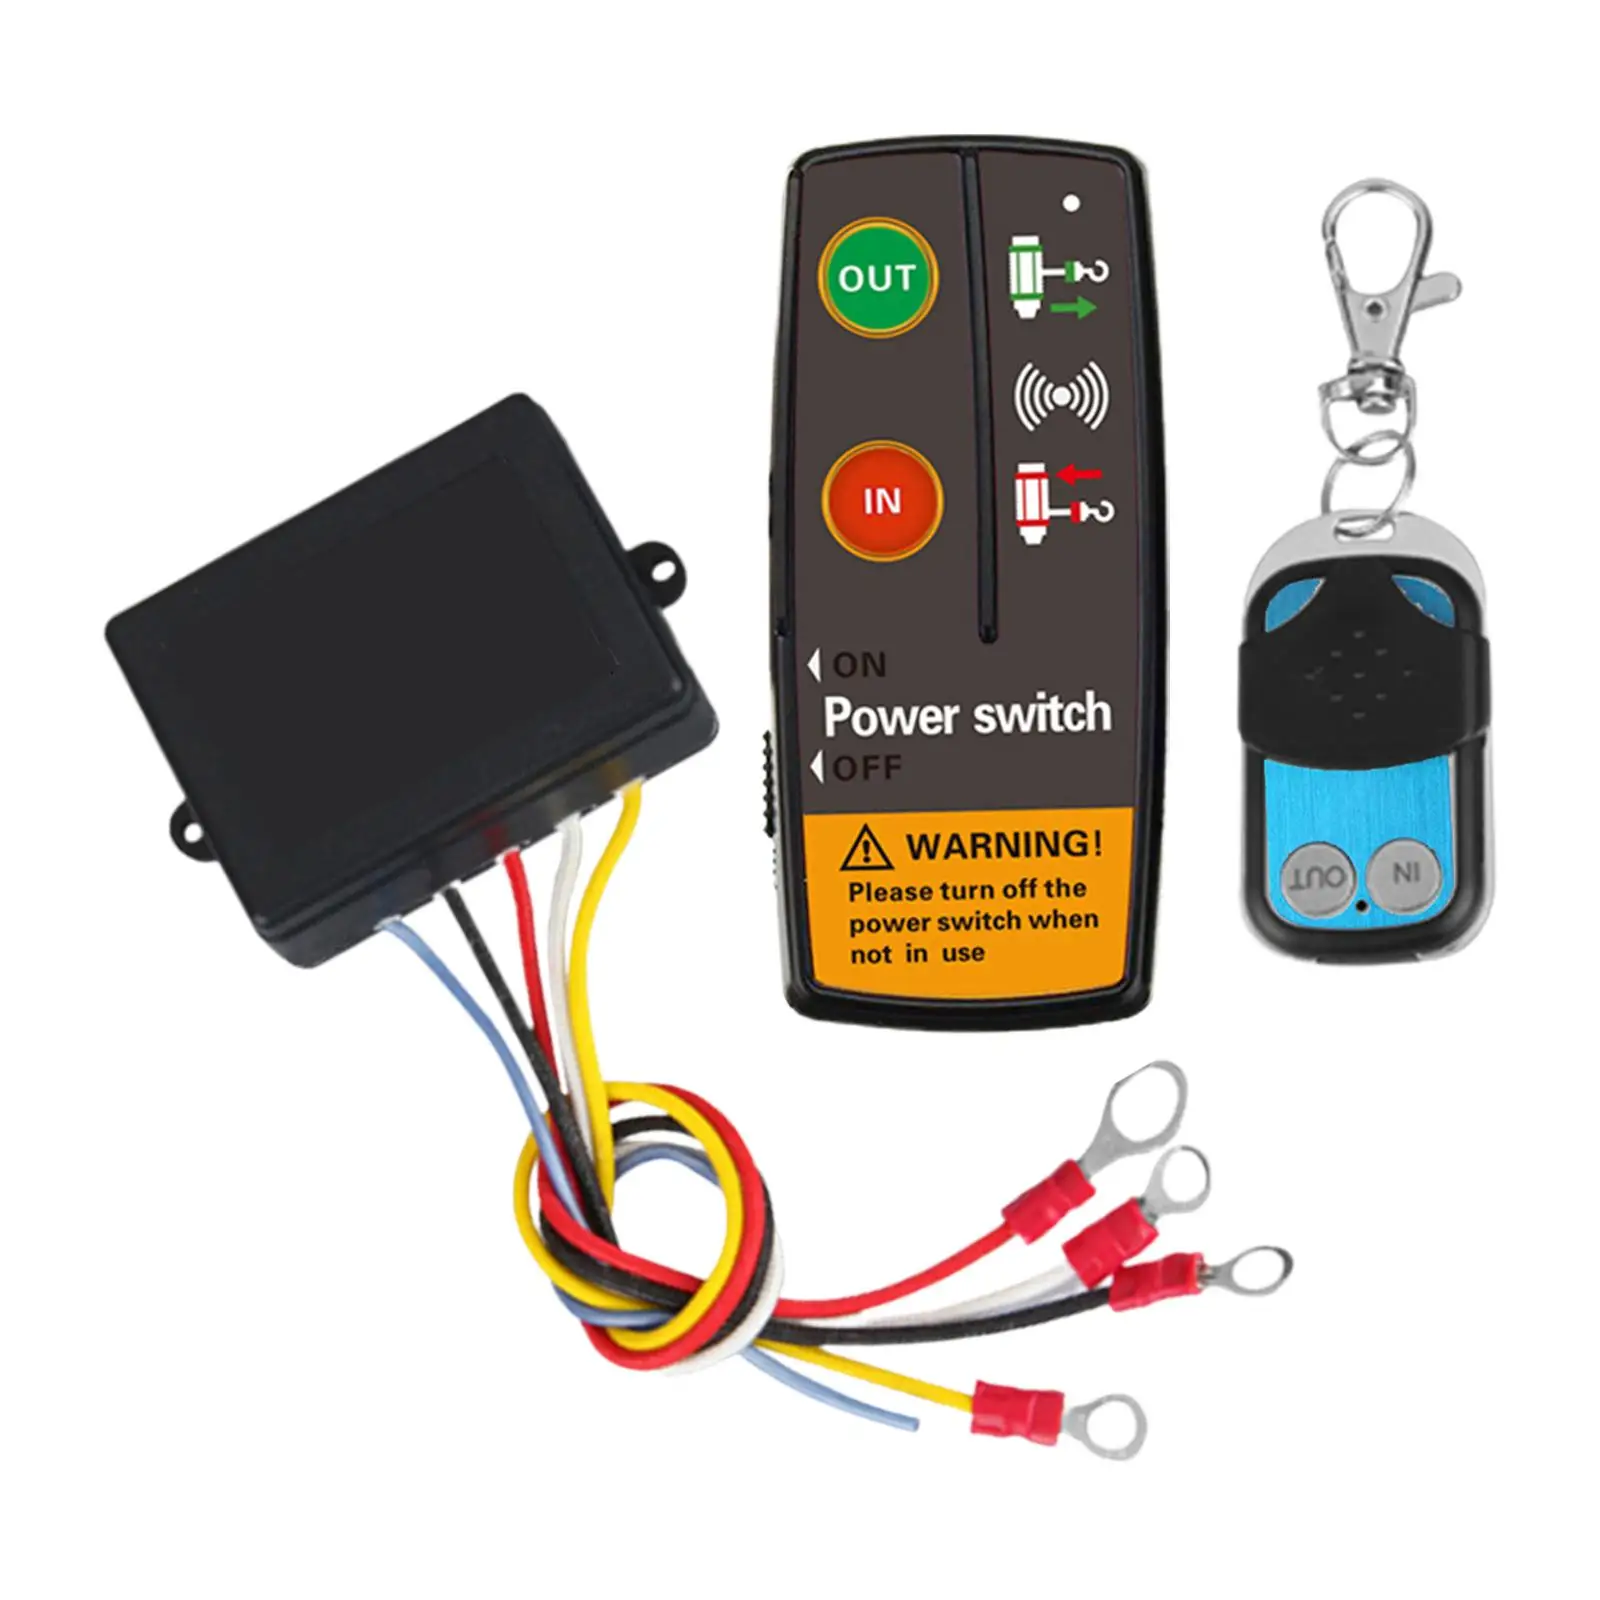 Wireless Winch Remote Control Set Premium Long Service Life High Performance for Car ATV Vehicle Truck Trailer